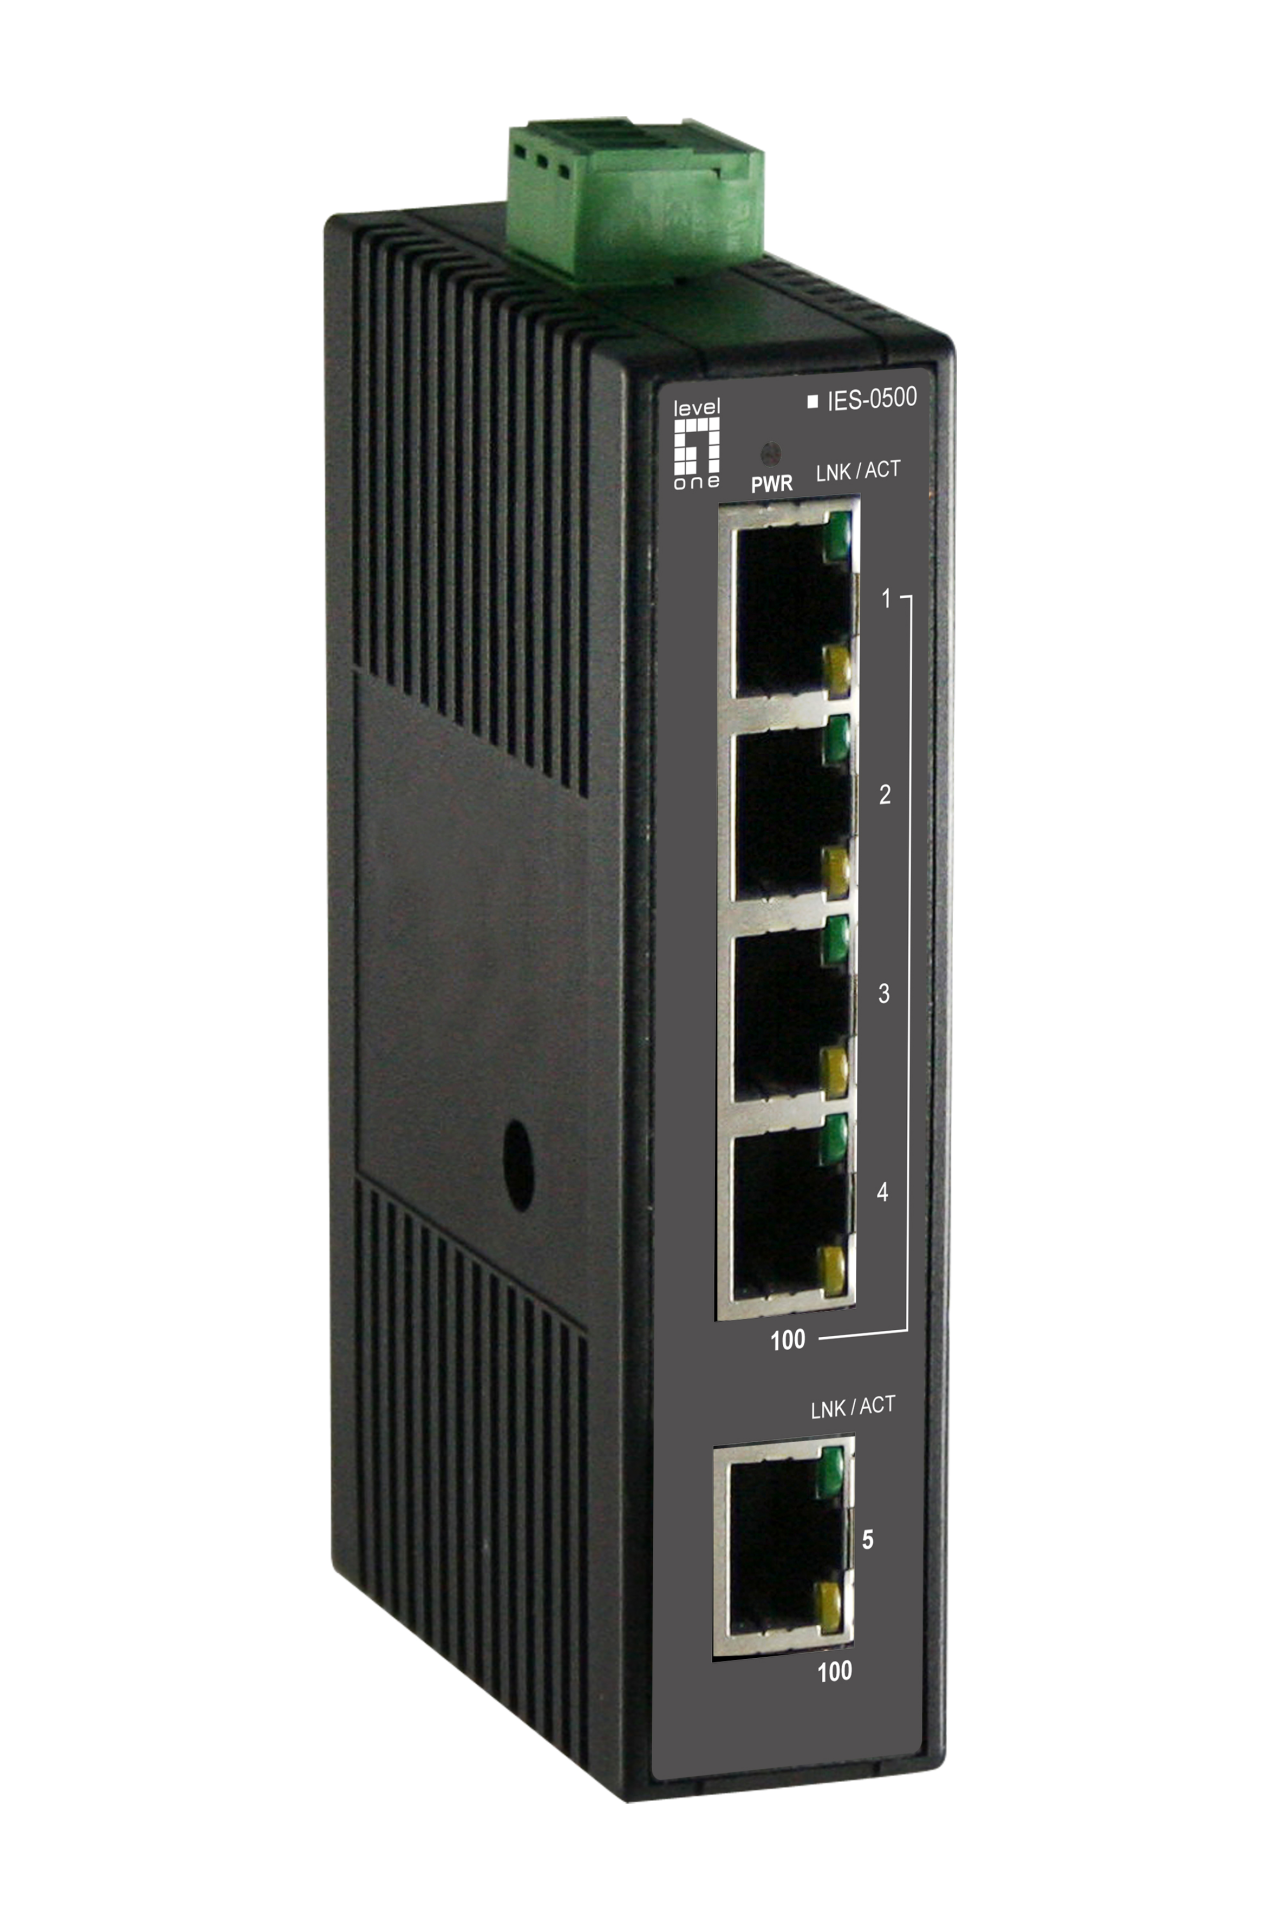 5-Port Fast Ethernet Industrial Switch, DIN rail